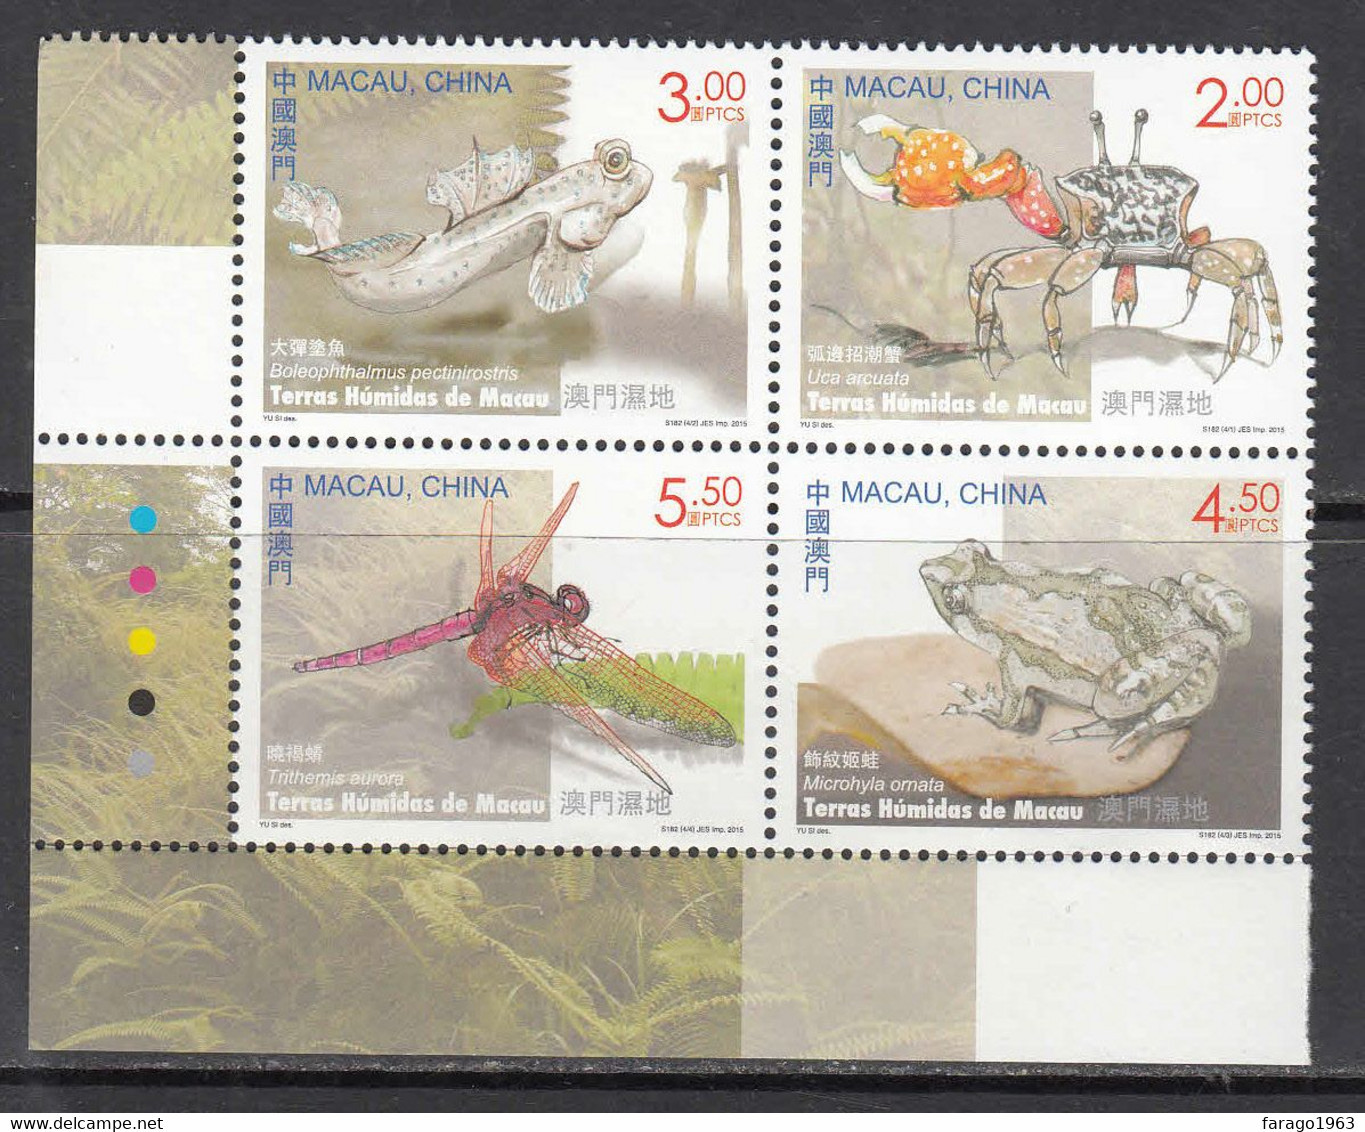 2015 Macau Wetlands Wildlife Crabs Fish Insects Frogs Complete Set Block Of 4 MNH @  FACE VALUE - Ungebraucht